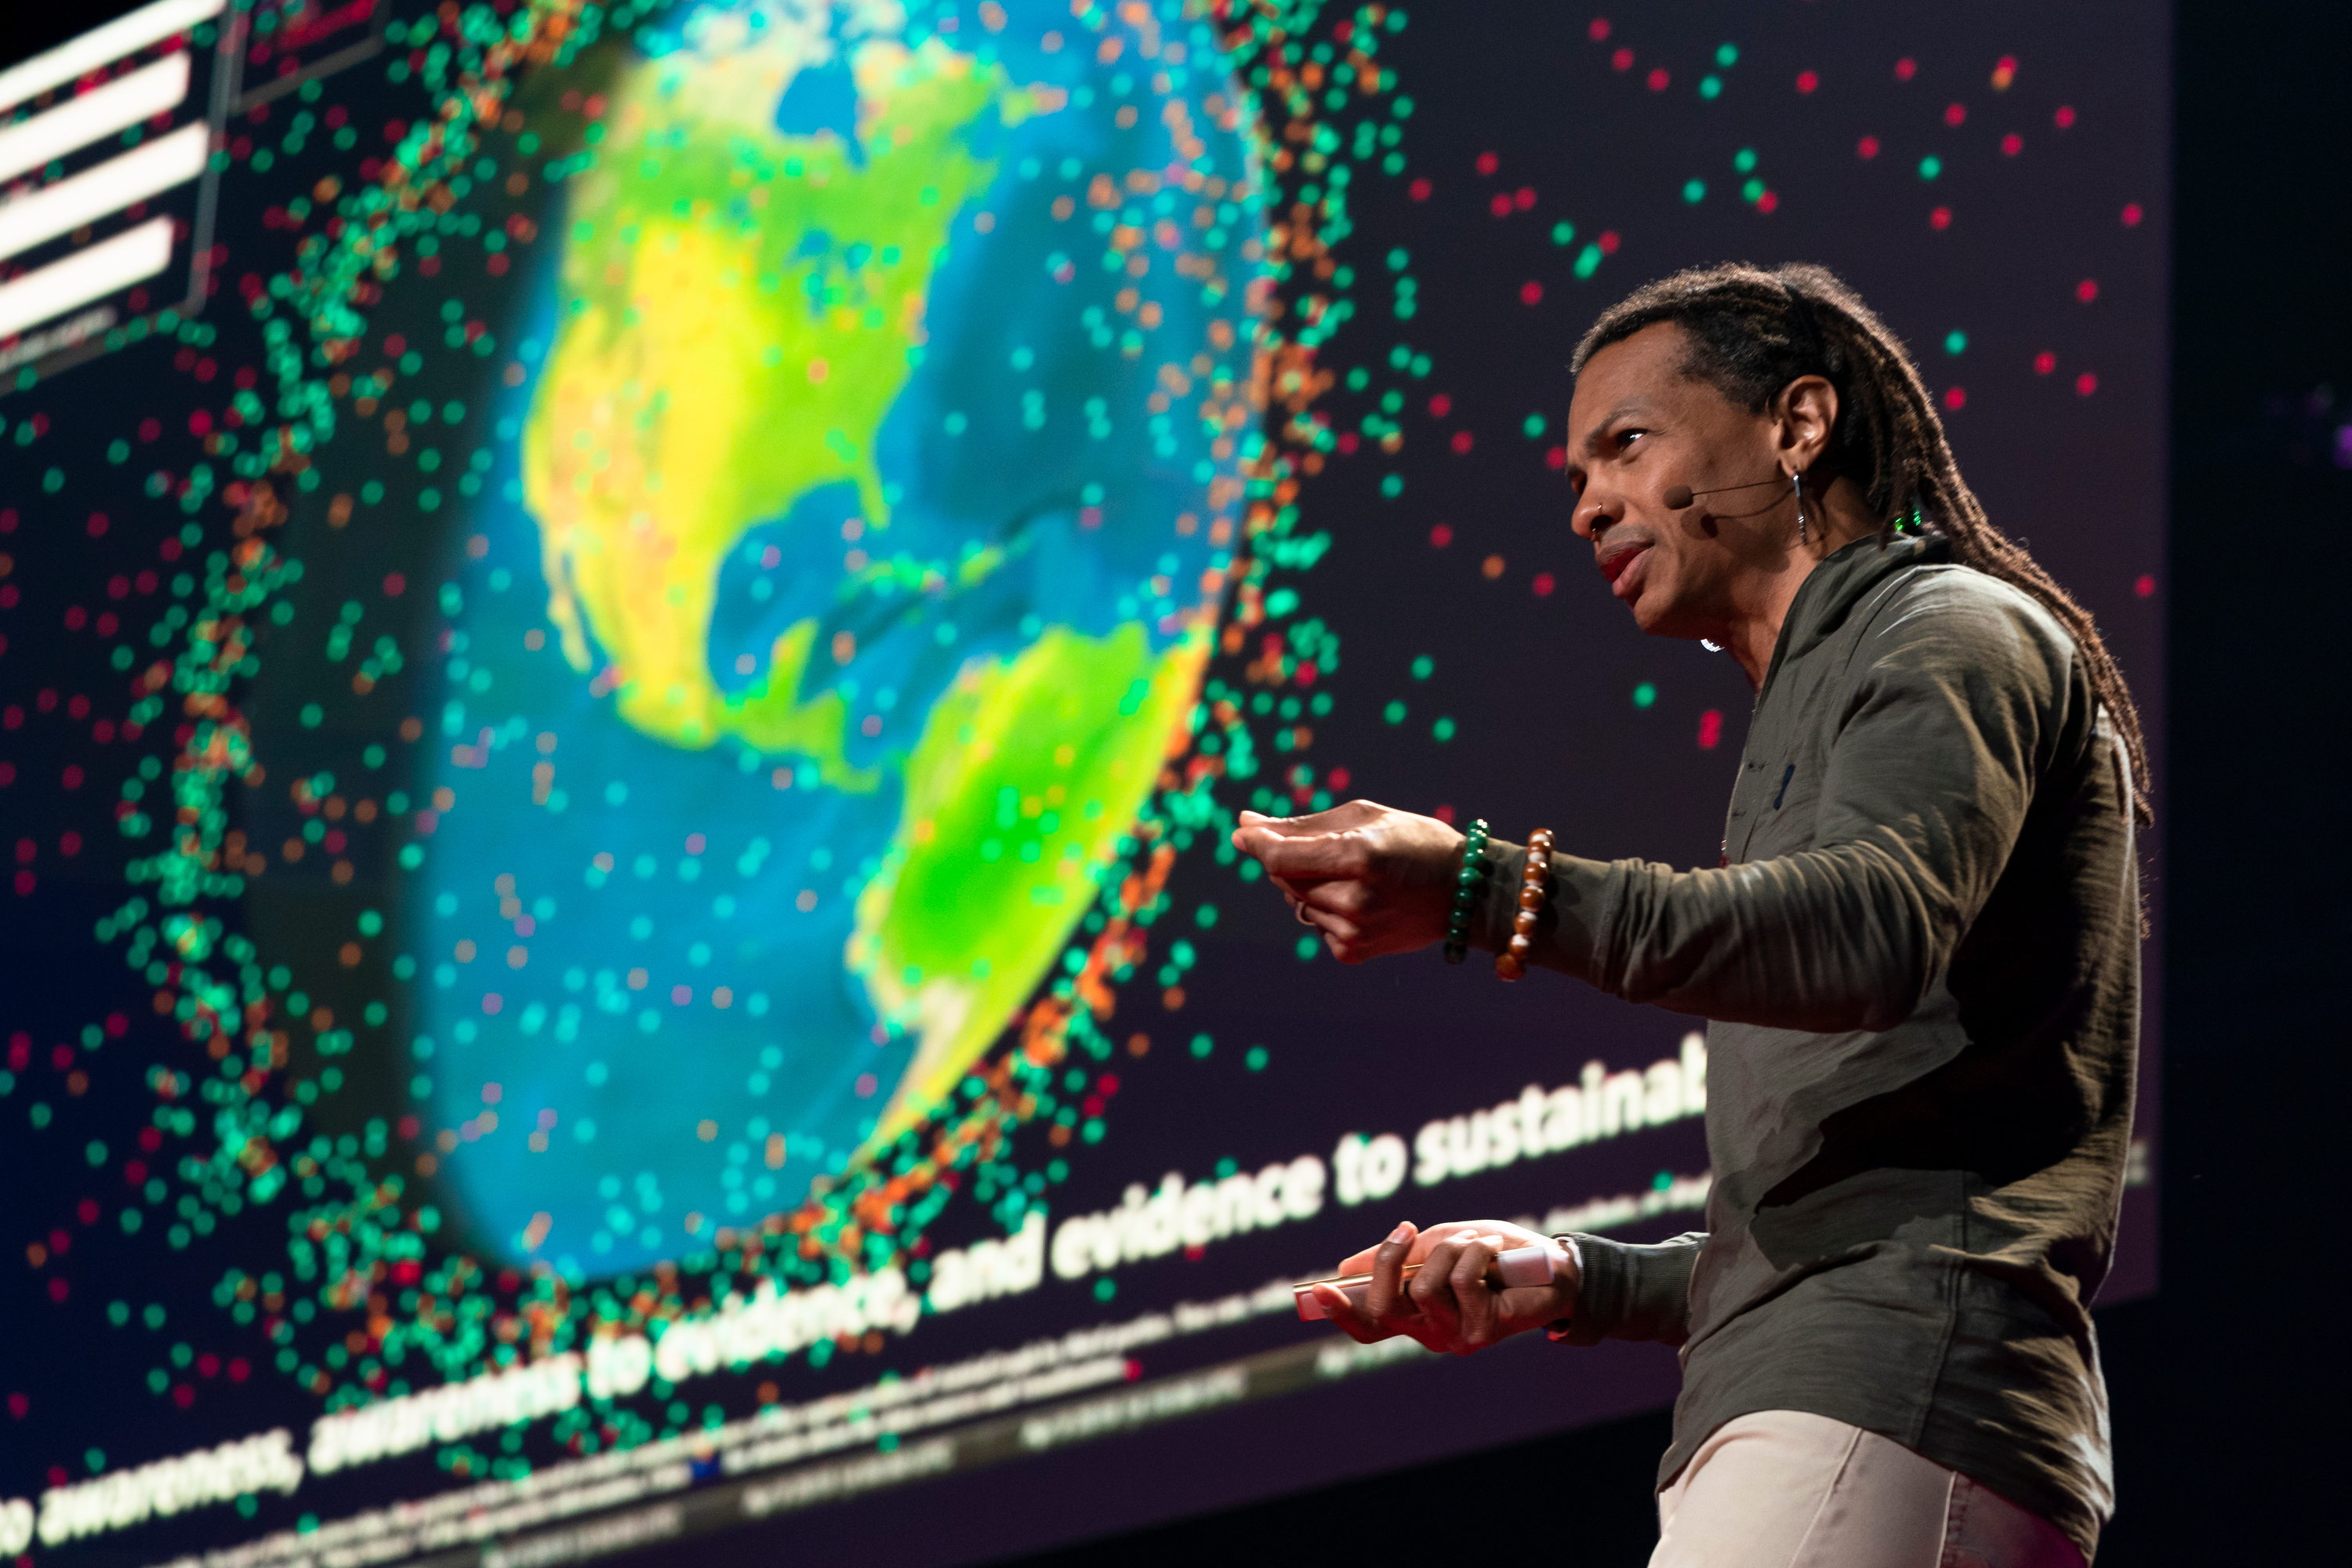 Looking at stars: Notes from Session 2 of TED2019 Fellows talks